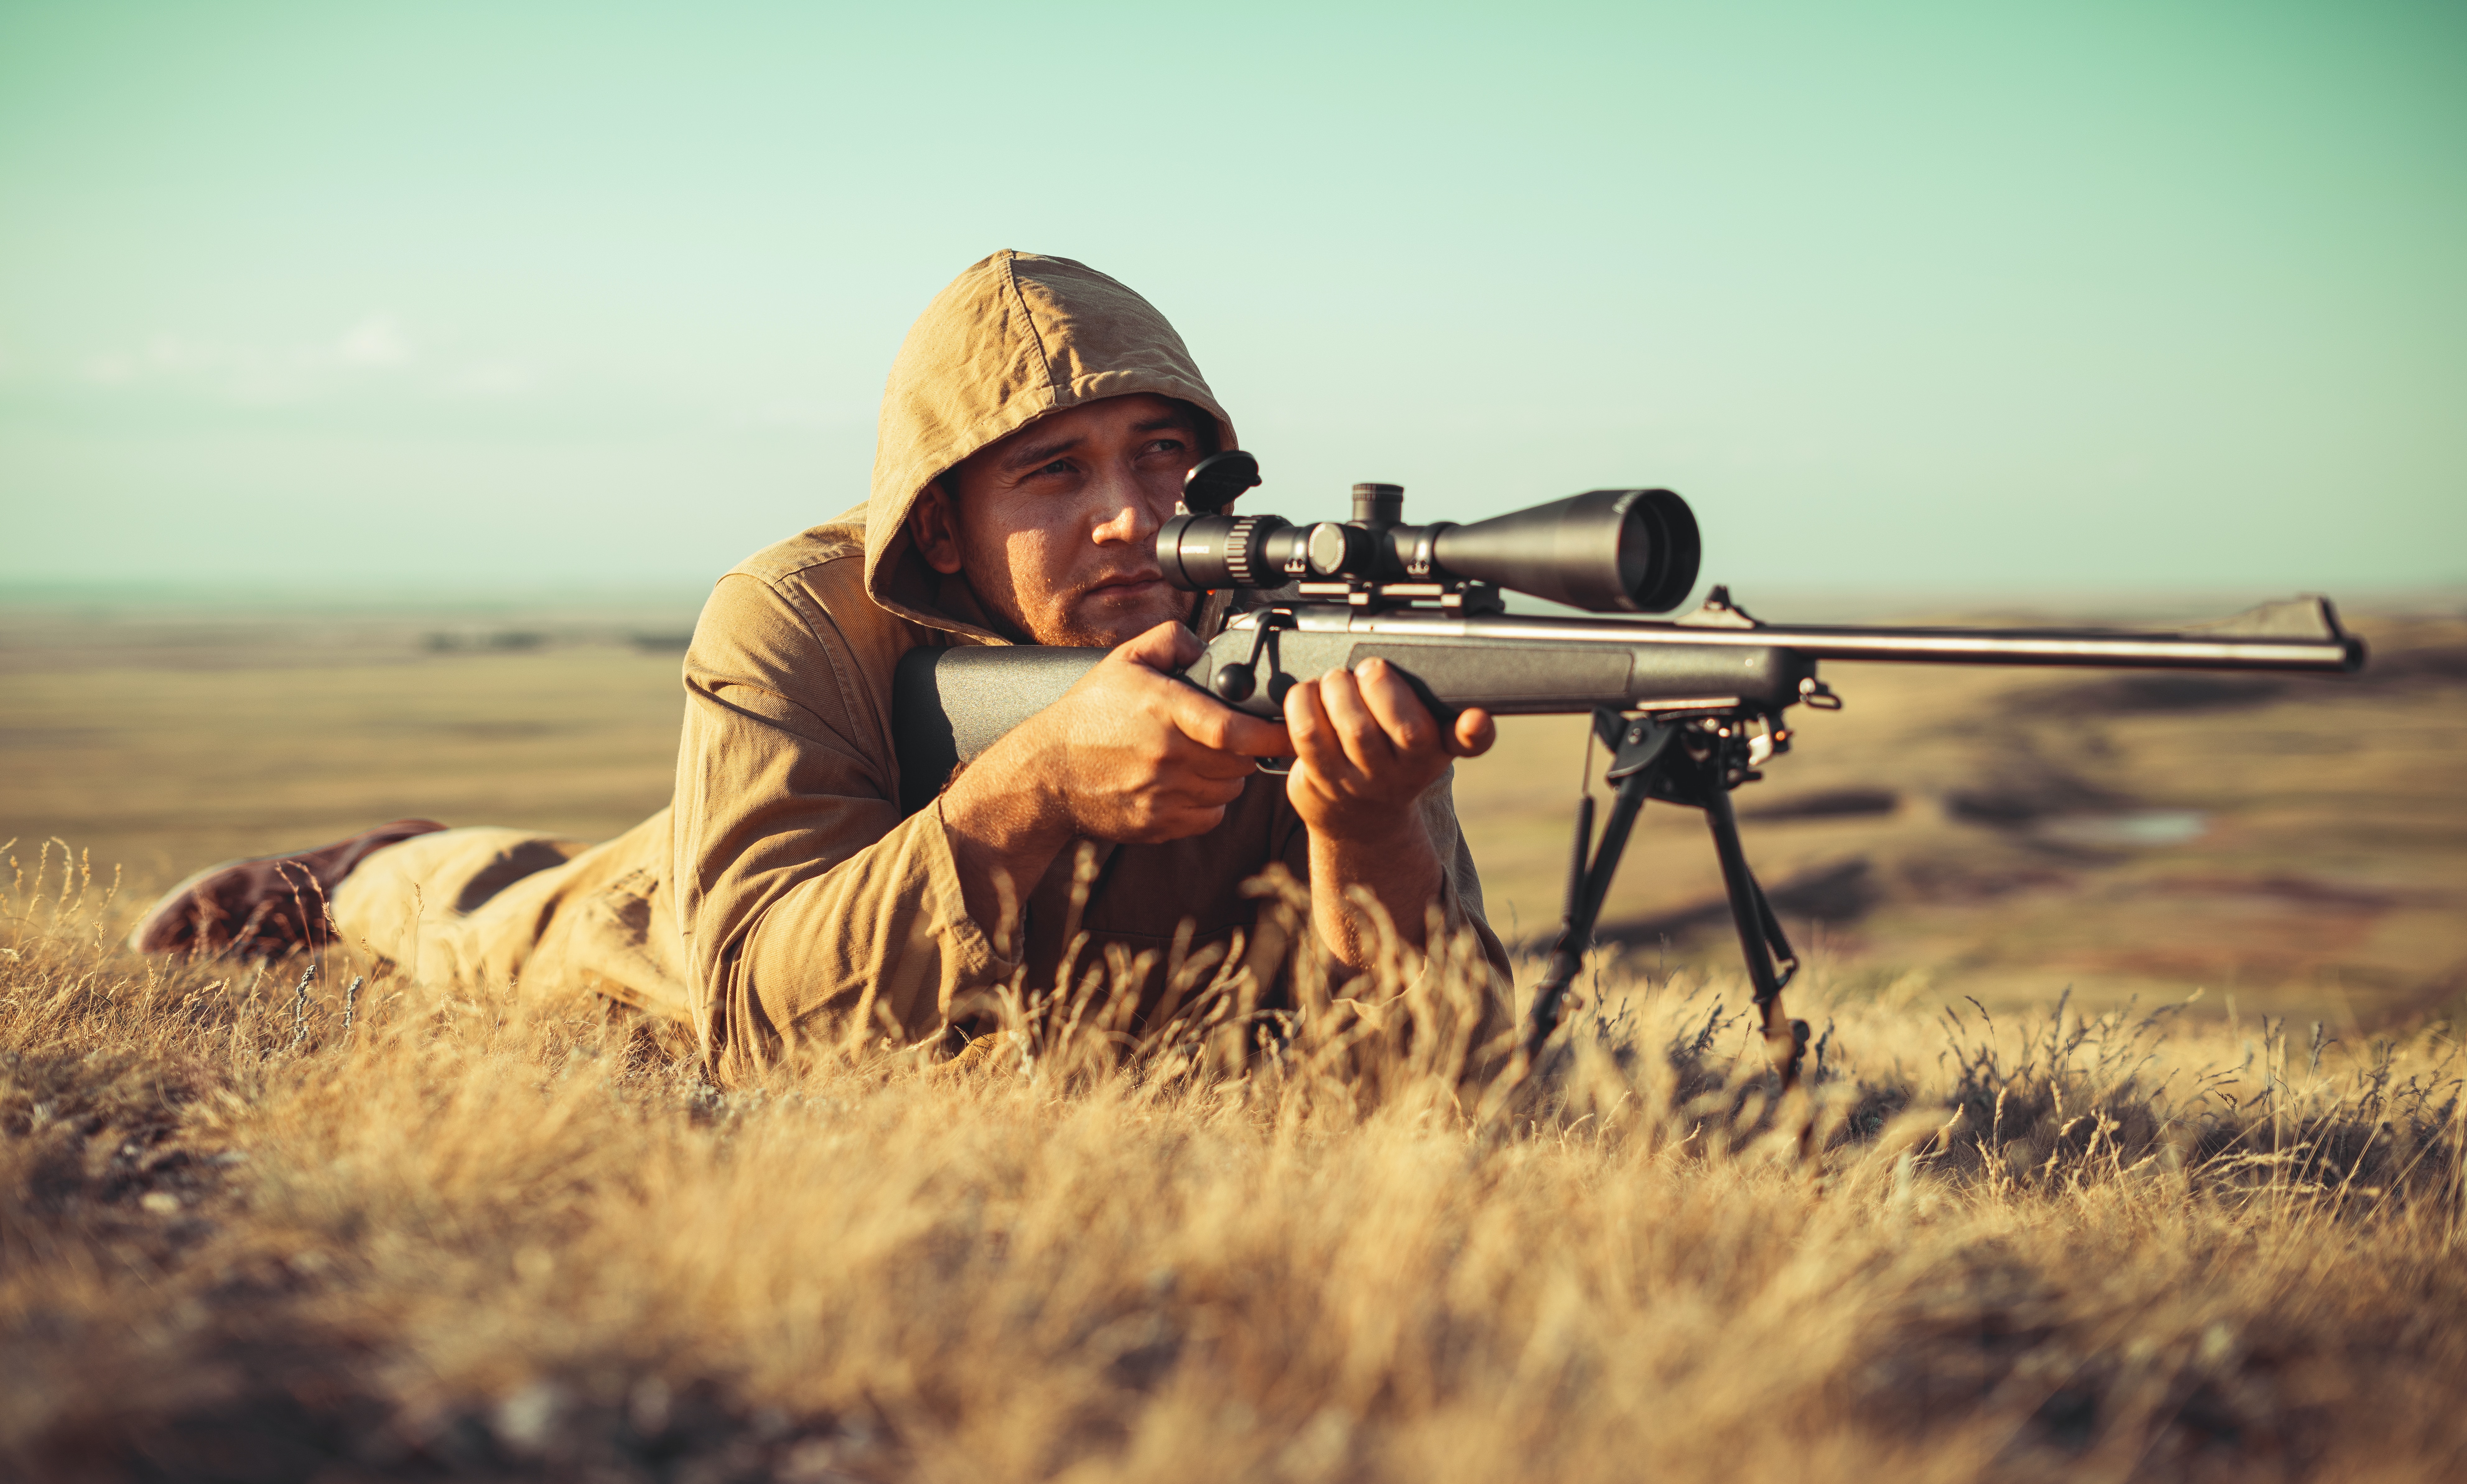 An image of a hunter with a rifle and binoculars, preparing for hunting in Mongolia